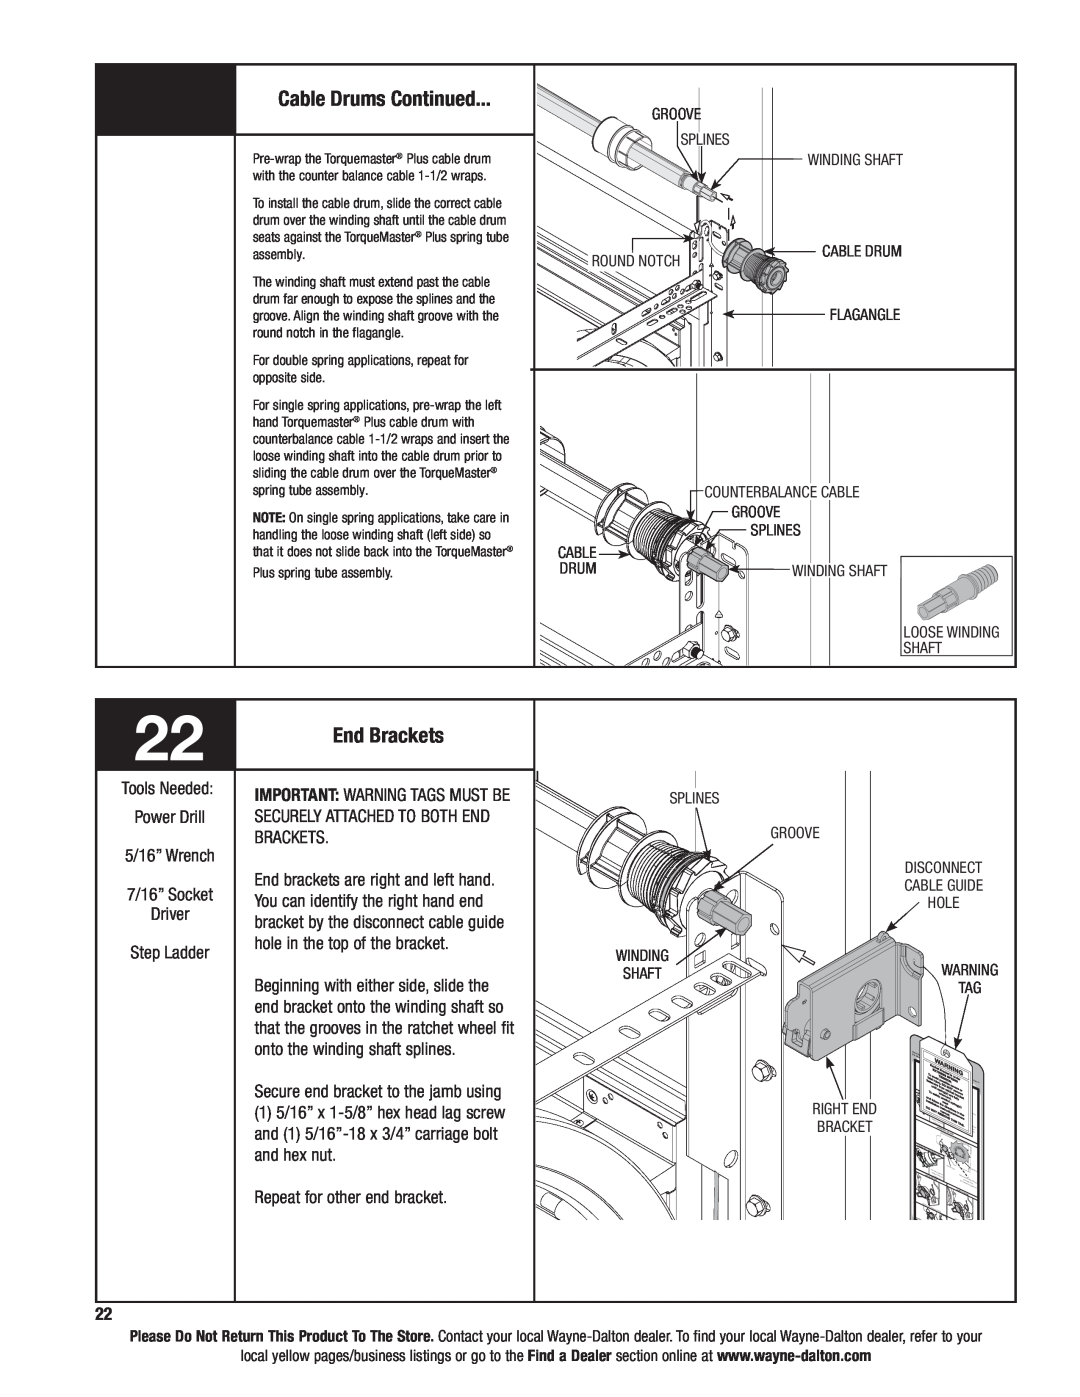 Wayne-Dalton 6100 installation instructions End Brackets, Cable Drums Continued 